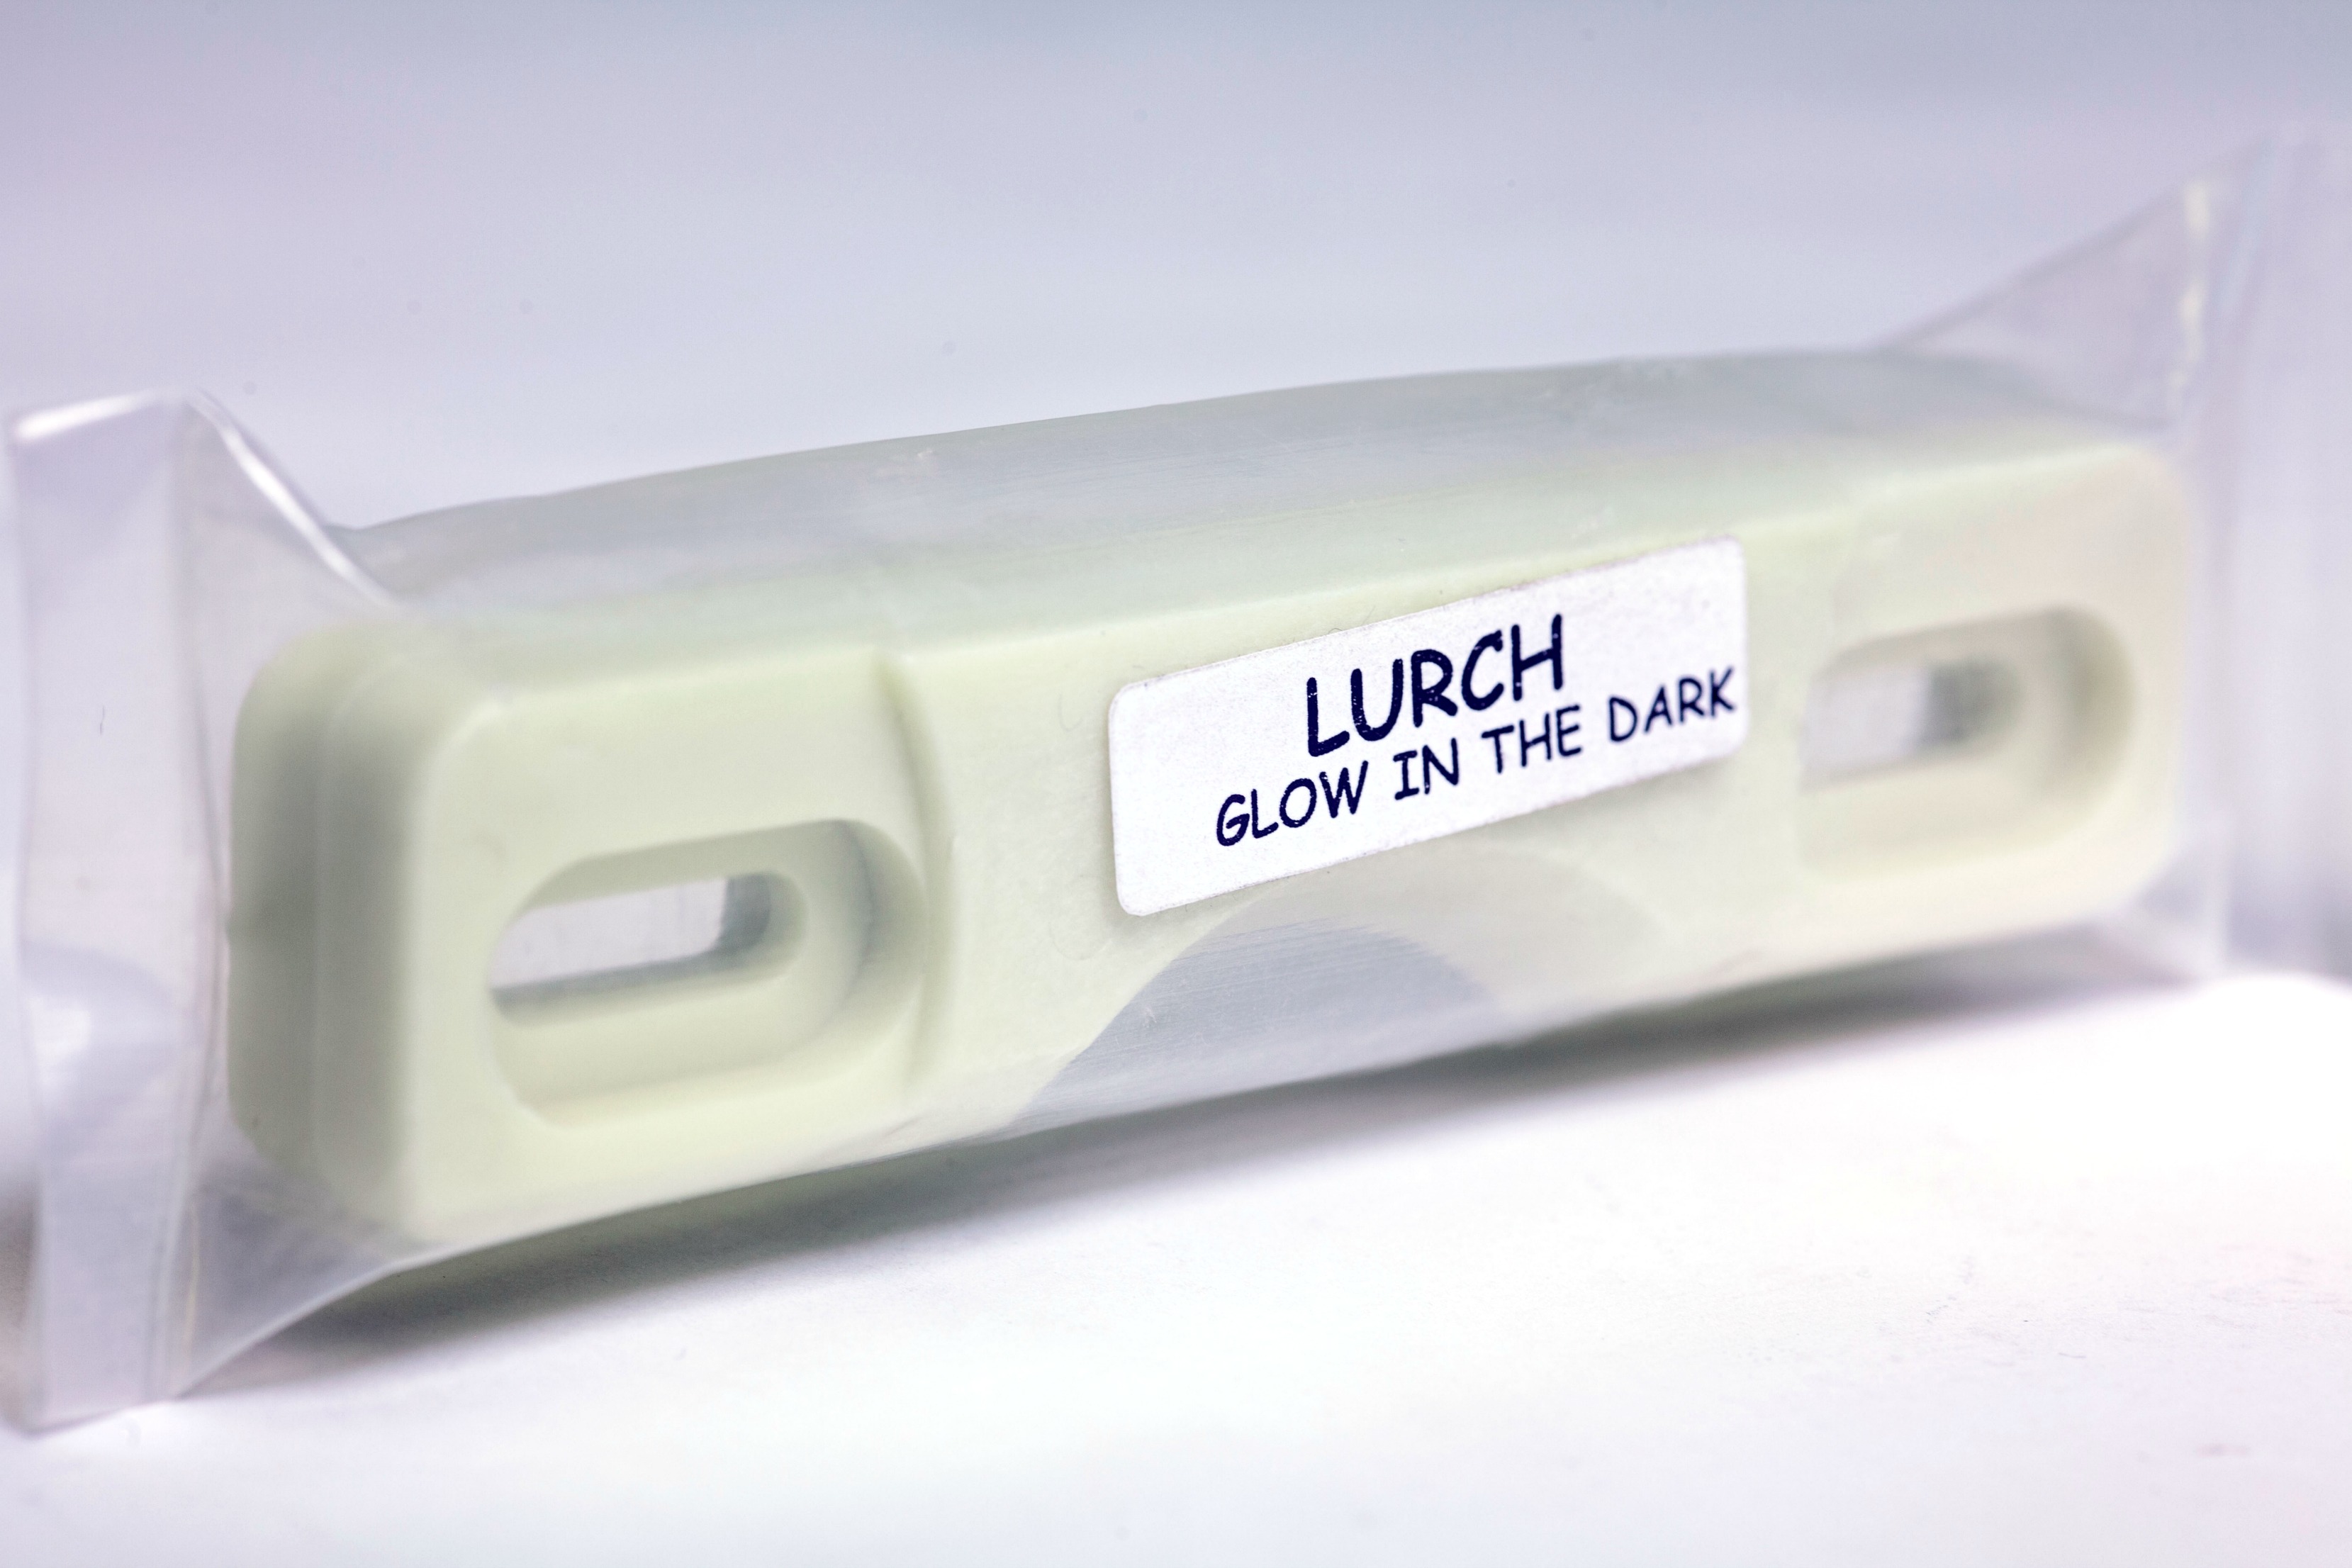 Hardcore 'Lurch' Glow In The Dark grind plates - The Blade Museum